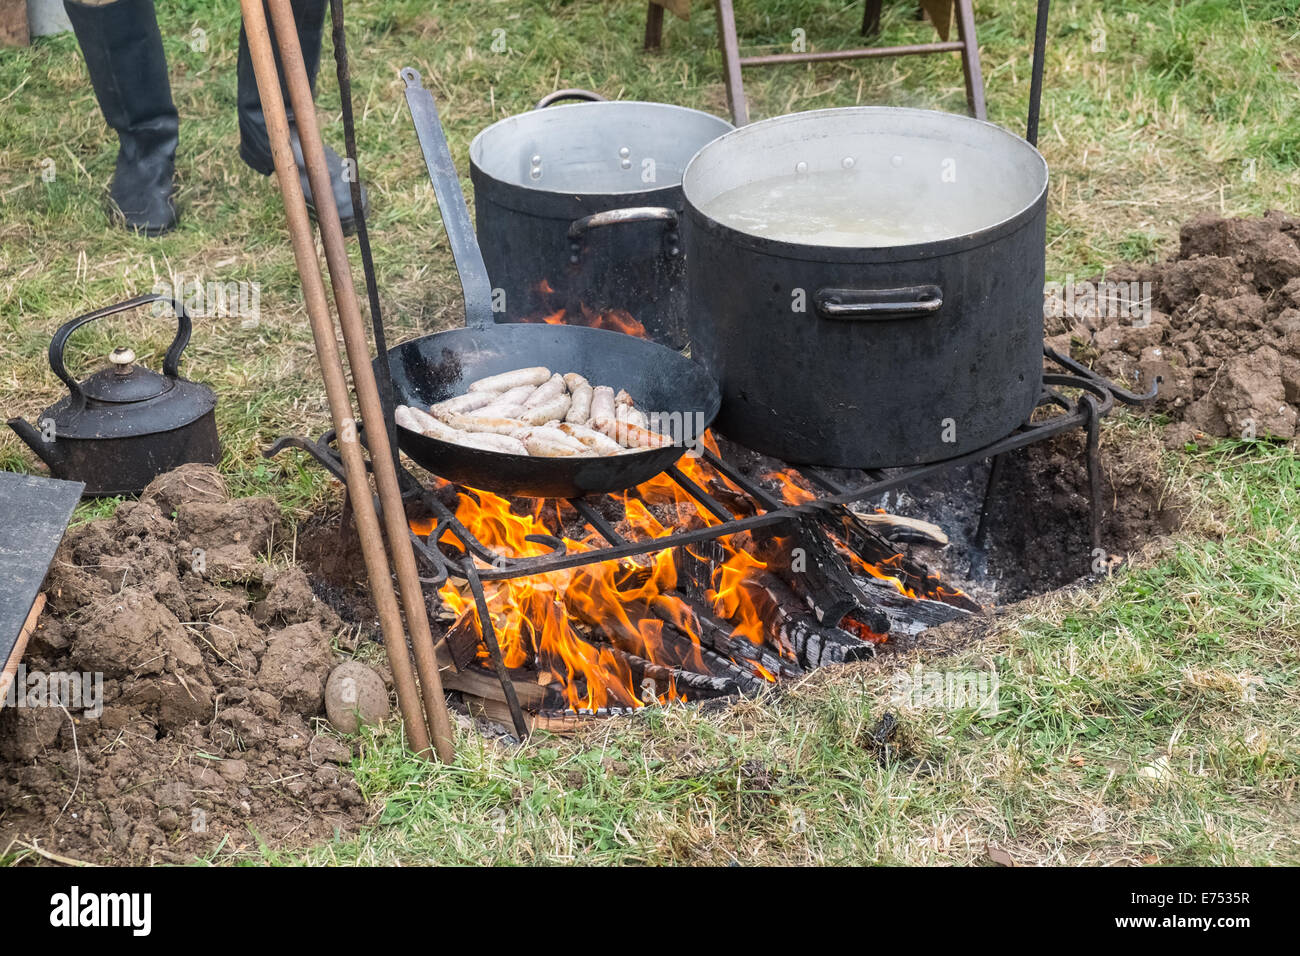 Sausages cooking on an open fire at a battle reenactment event, Leicestershire, England Stock Photo